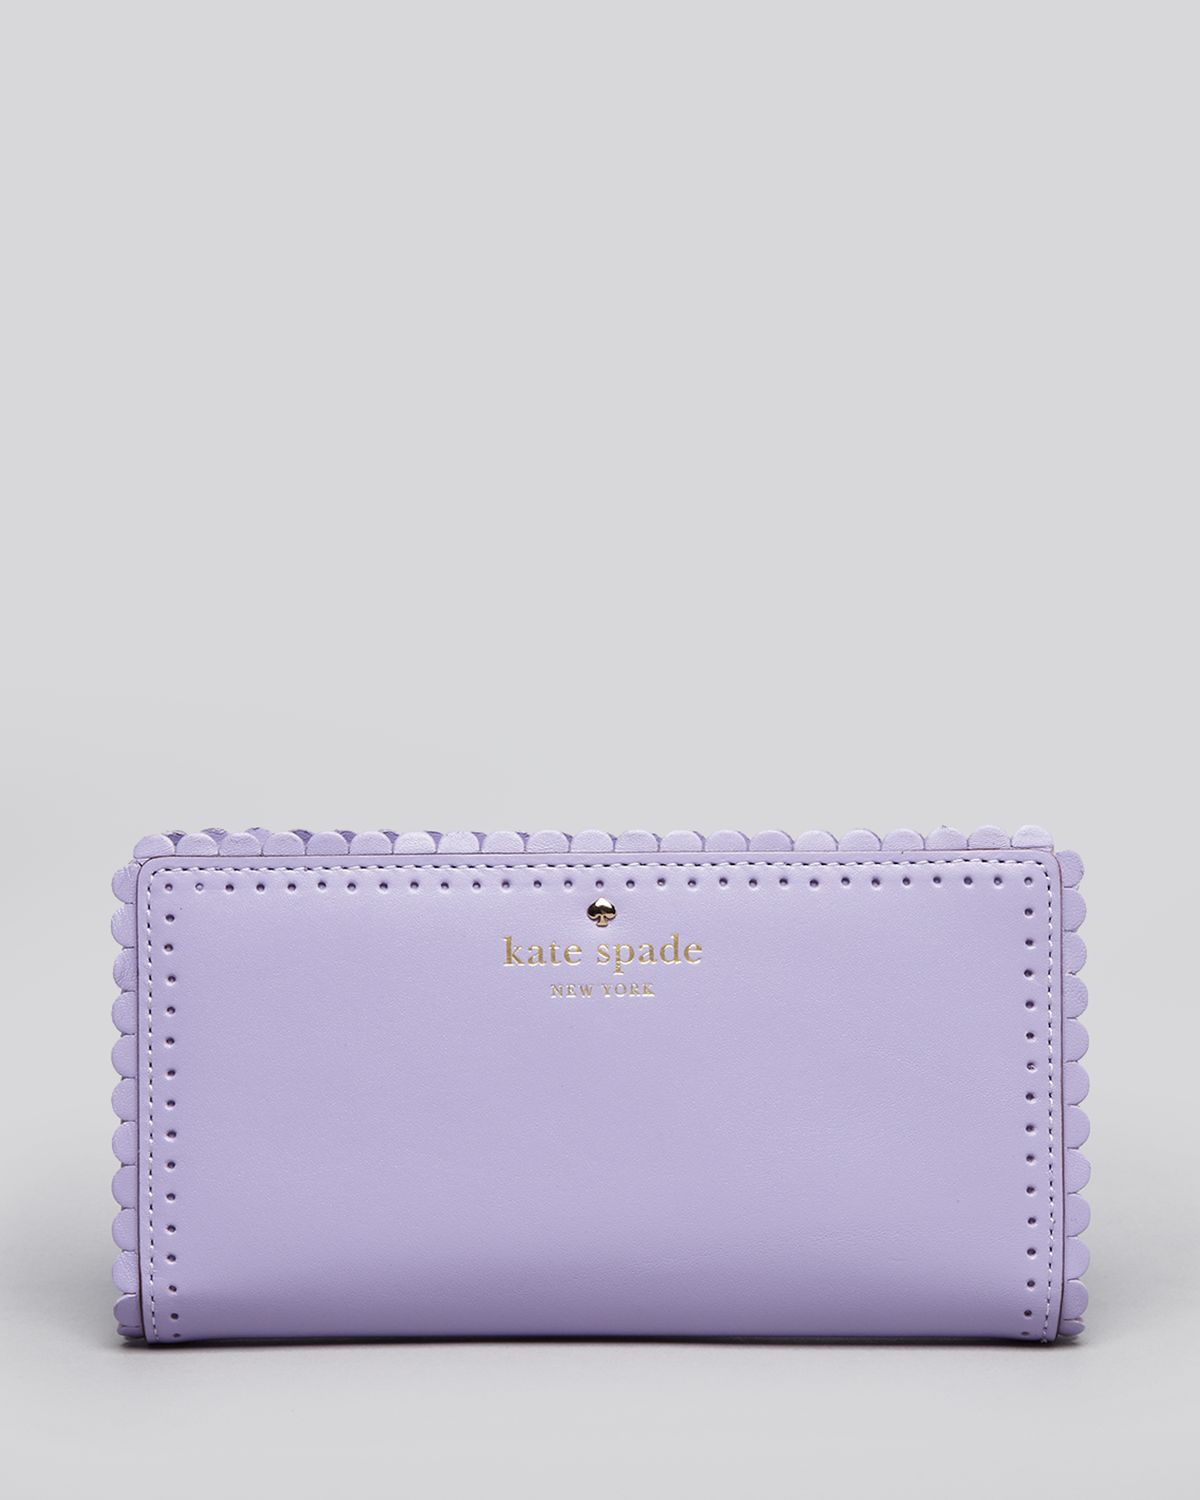 Kate spade new york Wallet Palm Springs Stacy in Purple Lyst